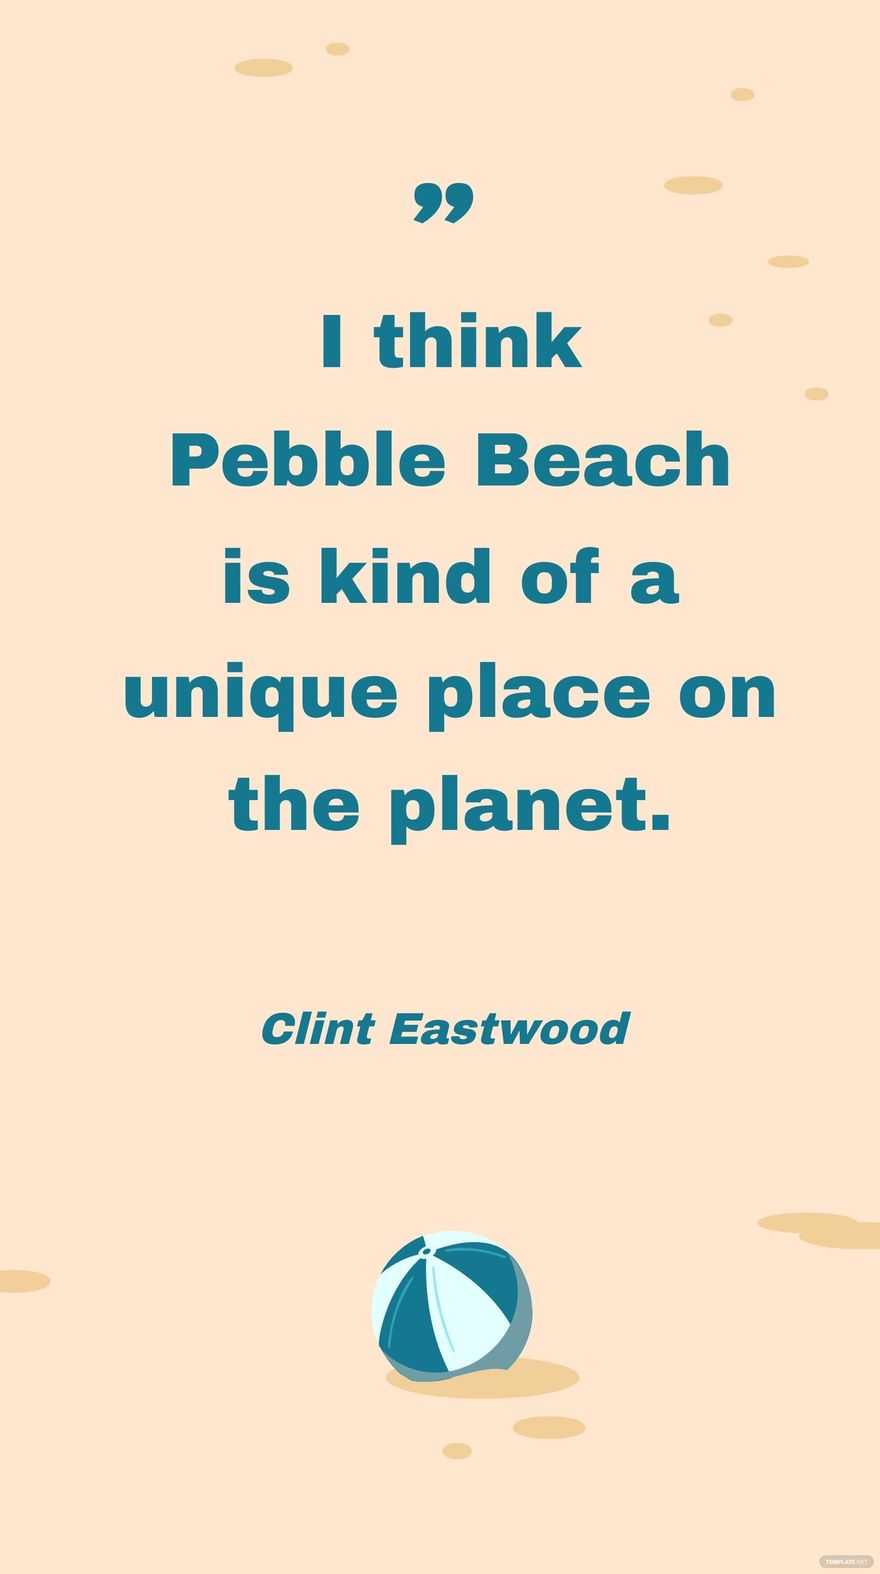 Clint Eastwood - I think Pebble Beach is kind of a unique place on the planet.